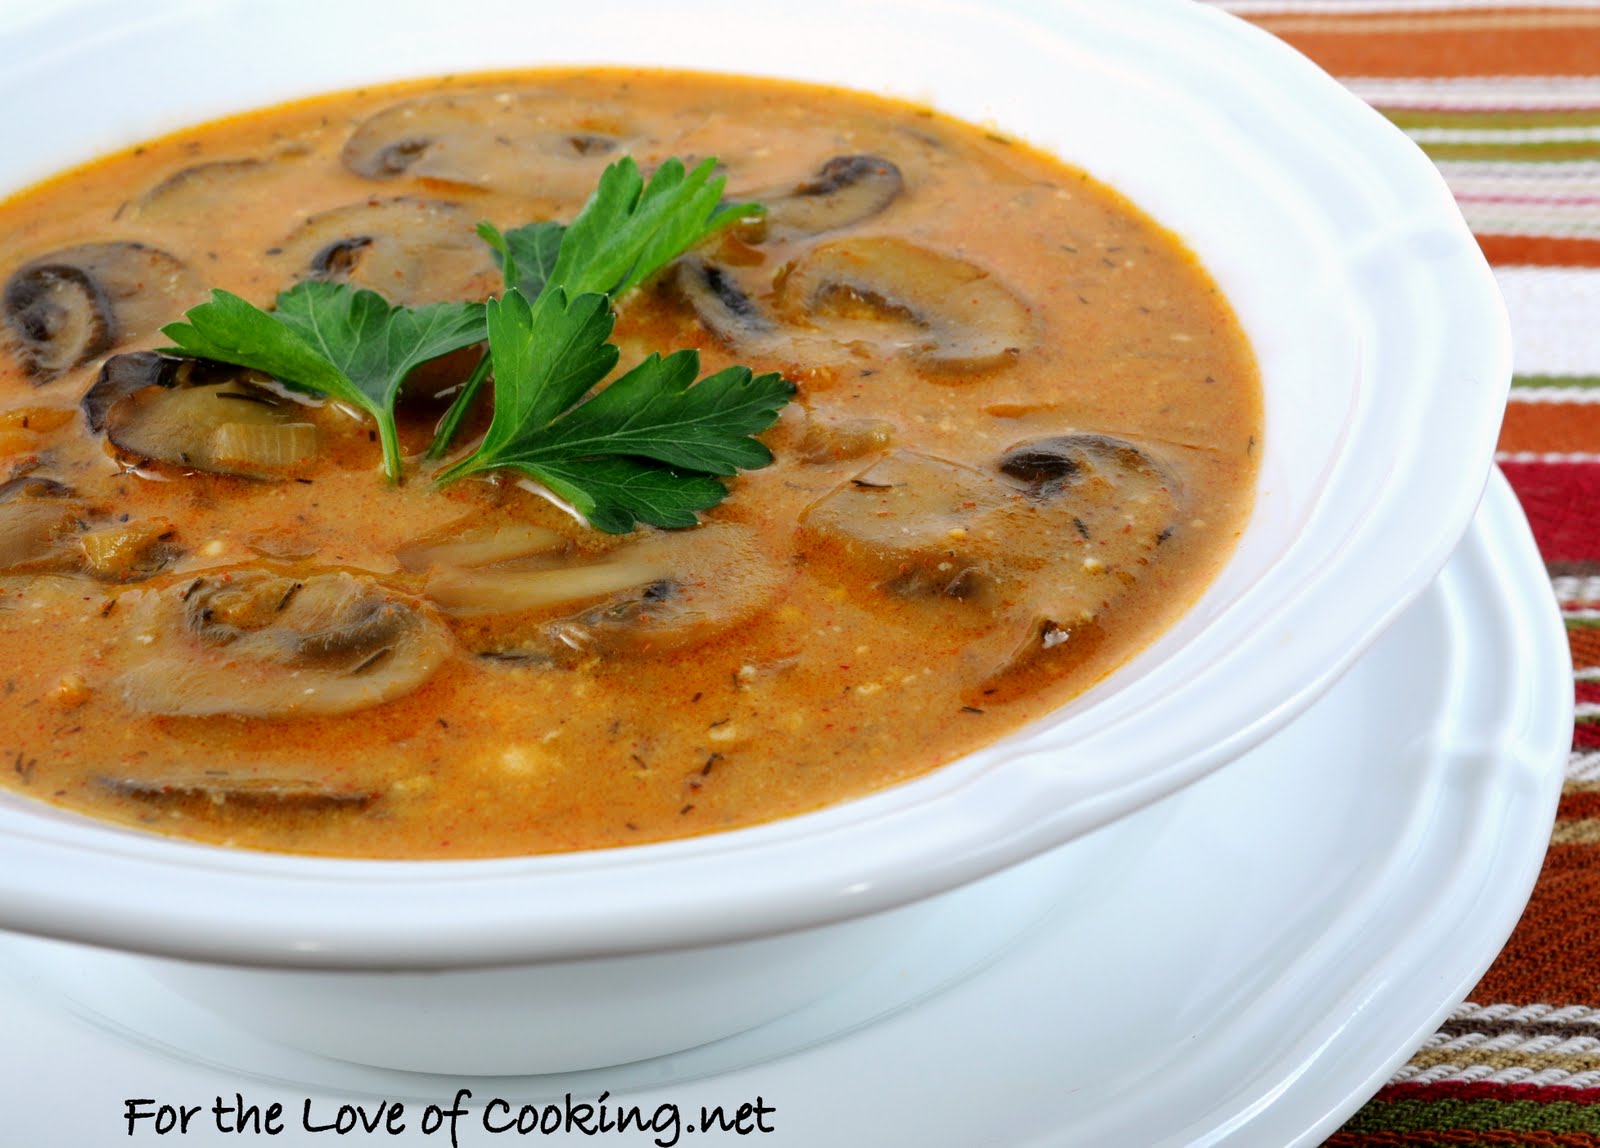 Hungarian Mushroom Soup | For the Love of Cooking